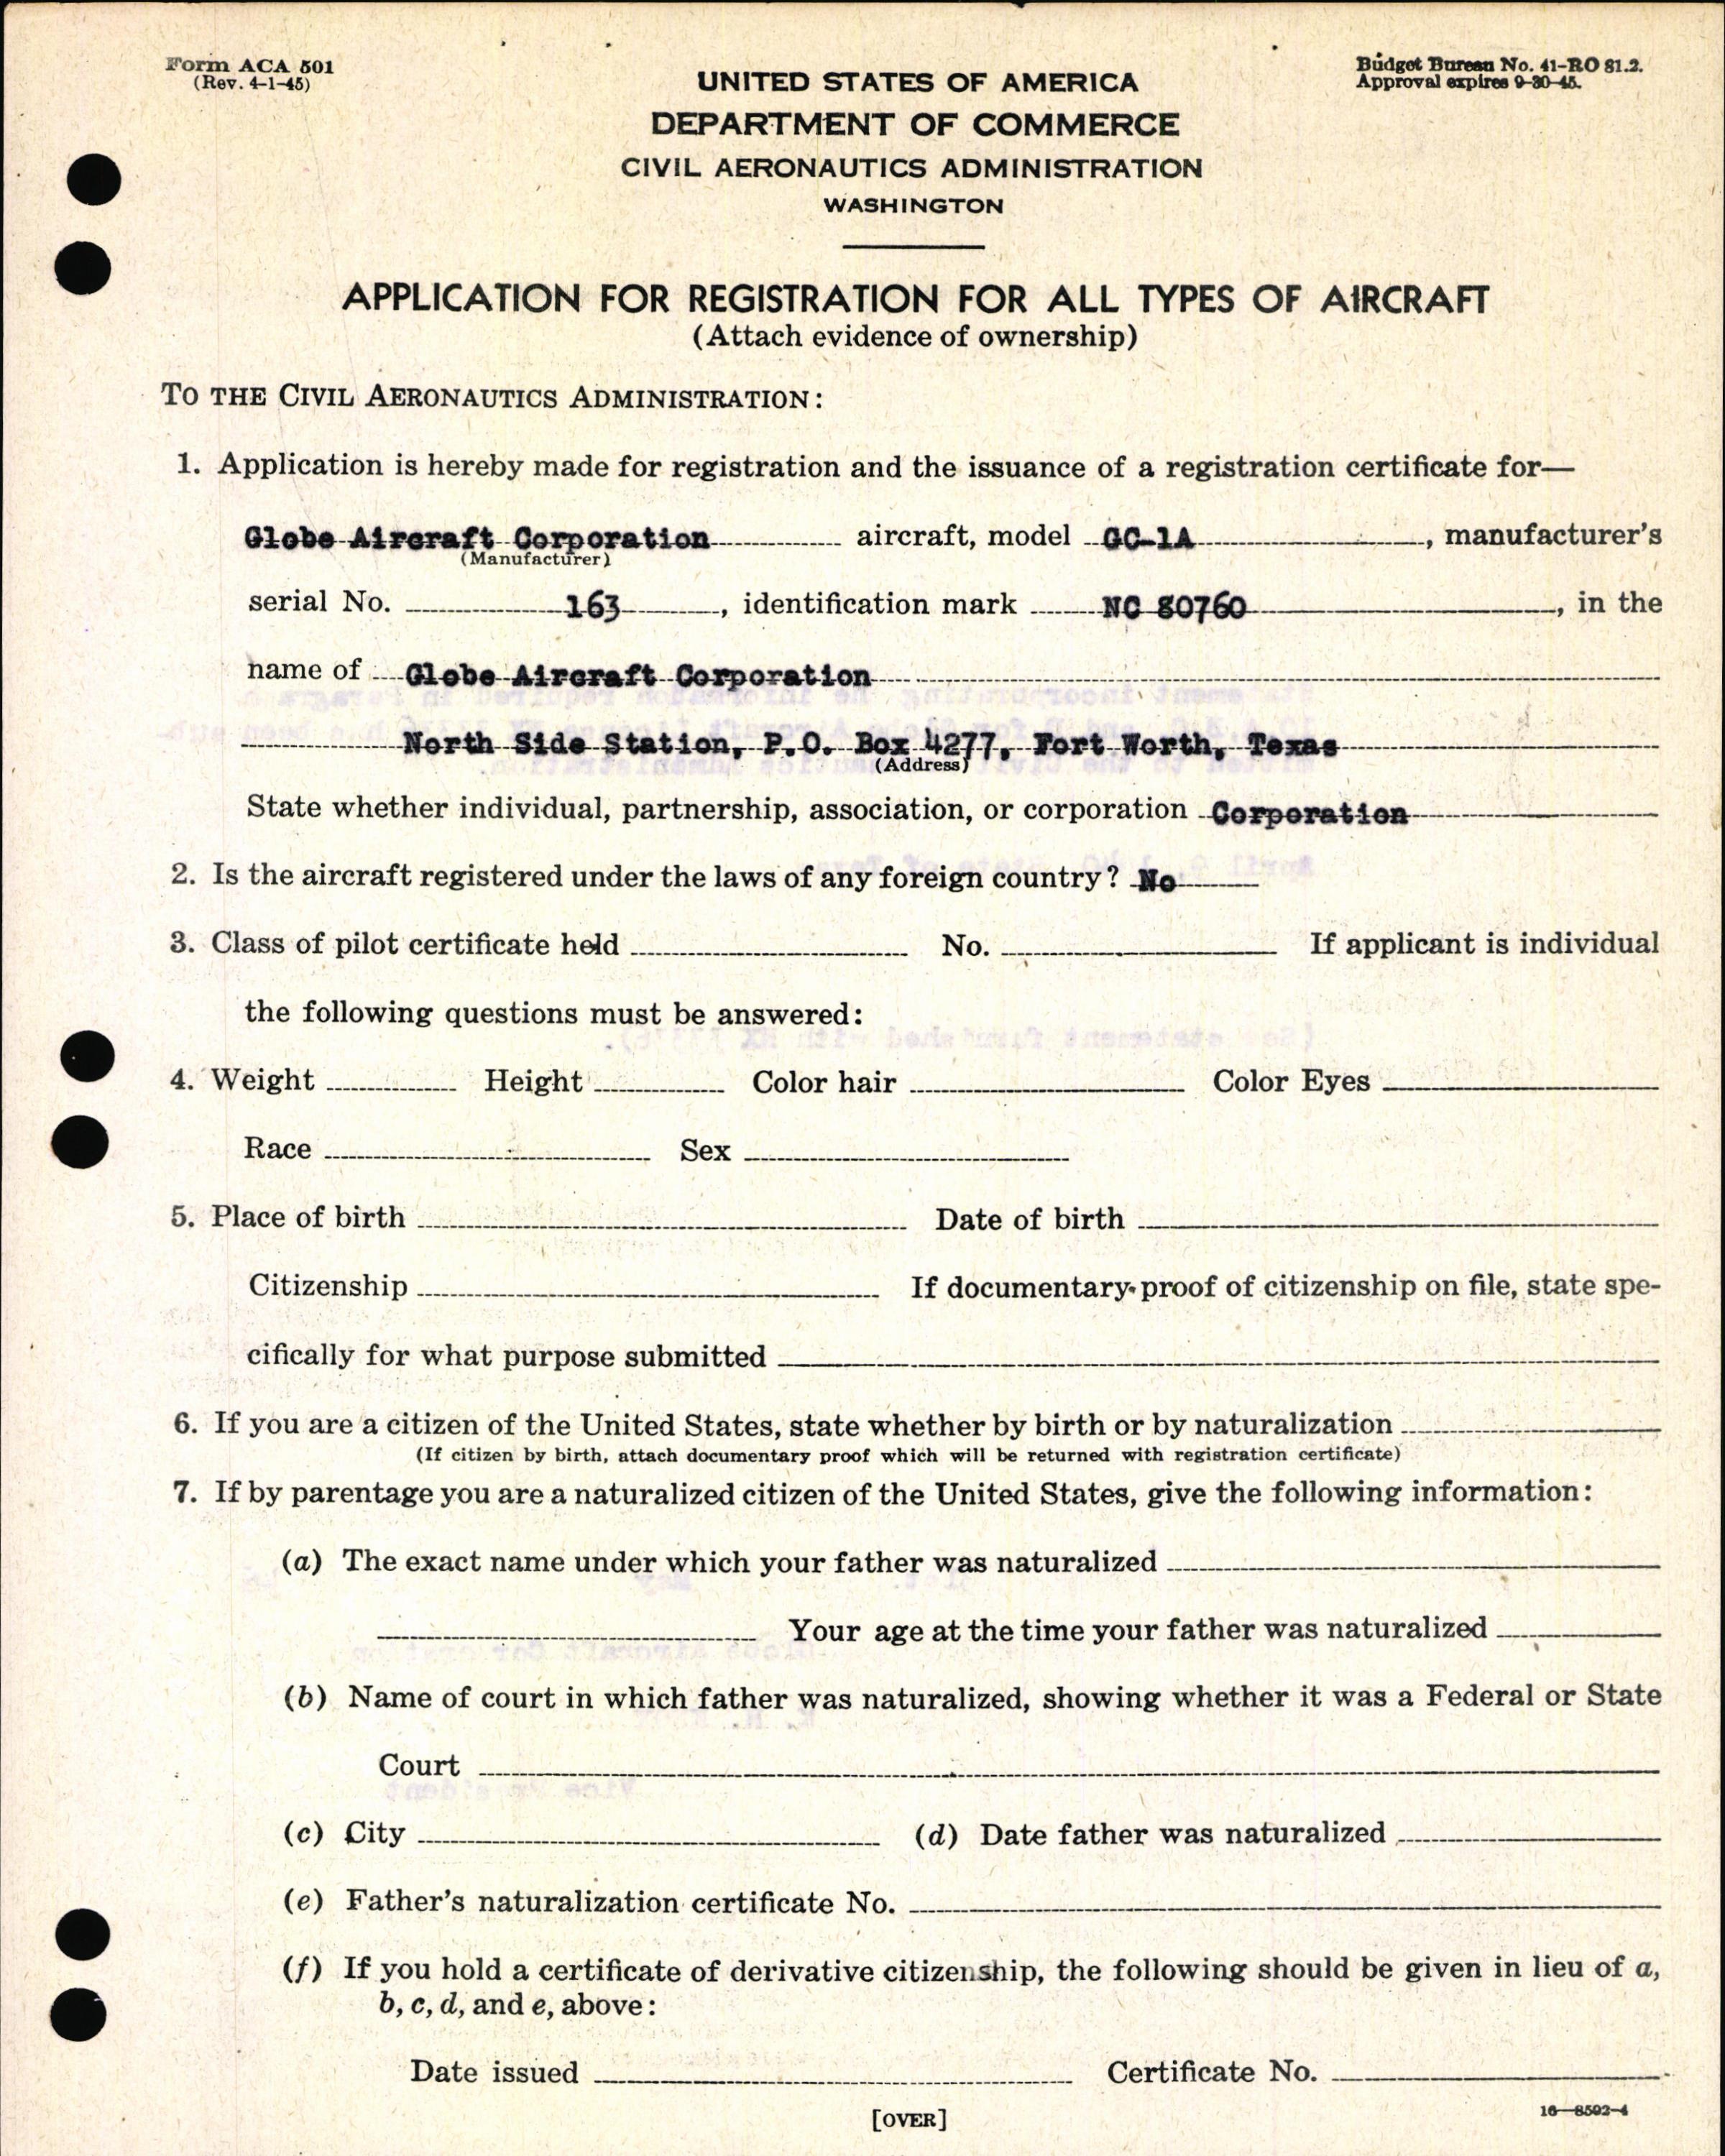 Sample page 7 from AirCorps Library document: Technical Information for Serial Number 163